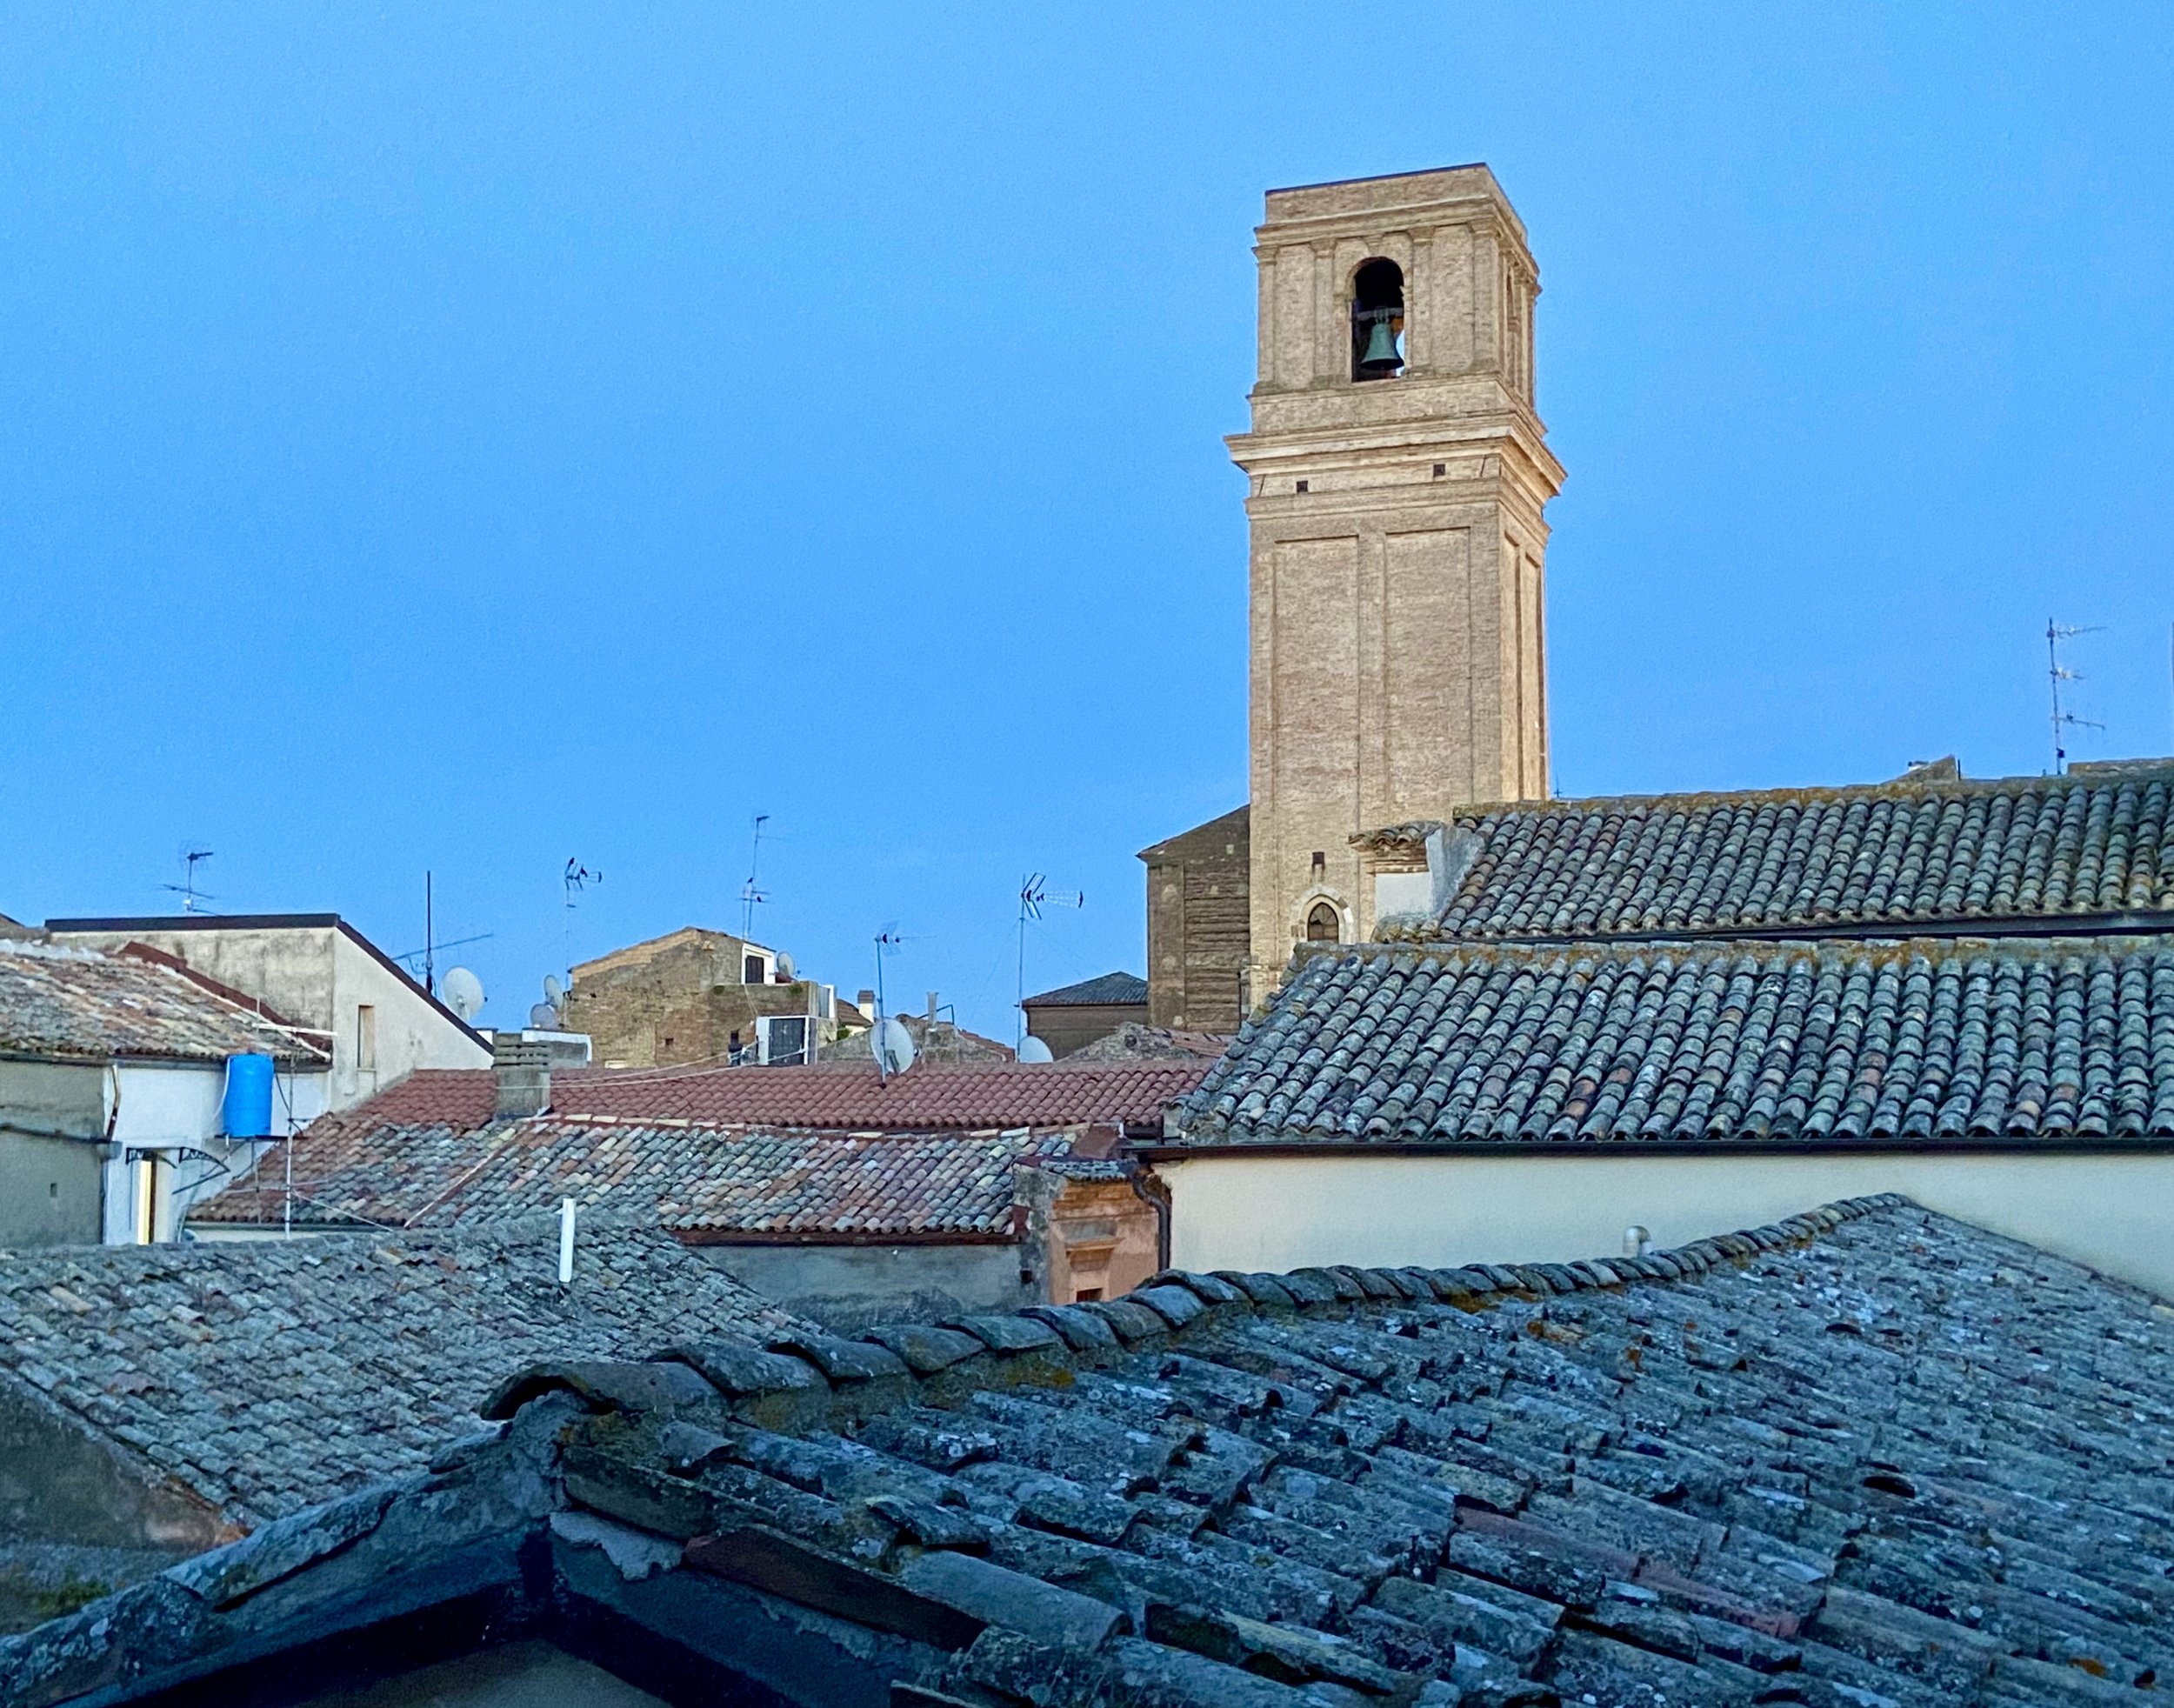 View from Junior Suite of Santa Maria Maggiore church tower